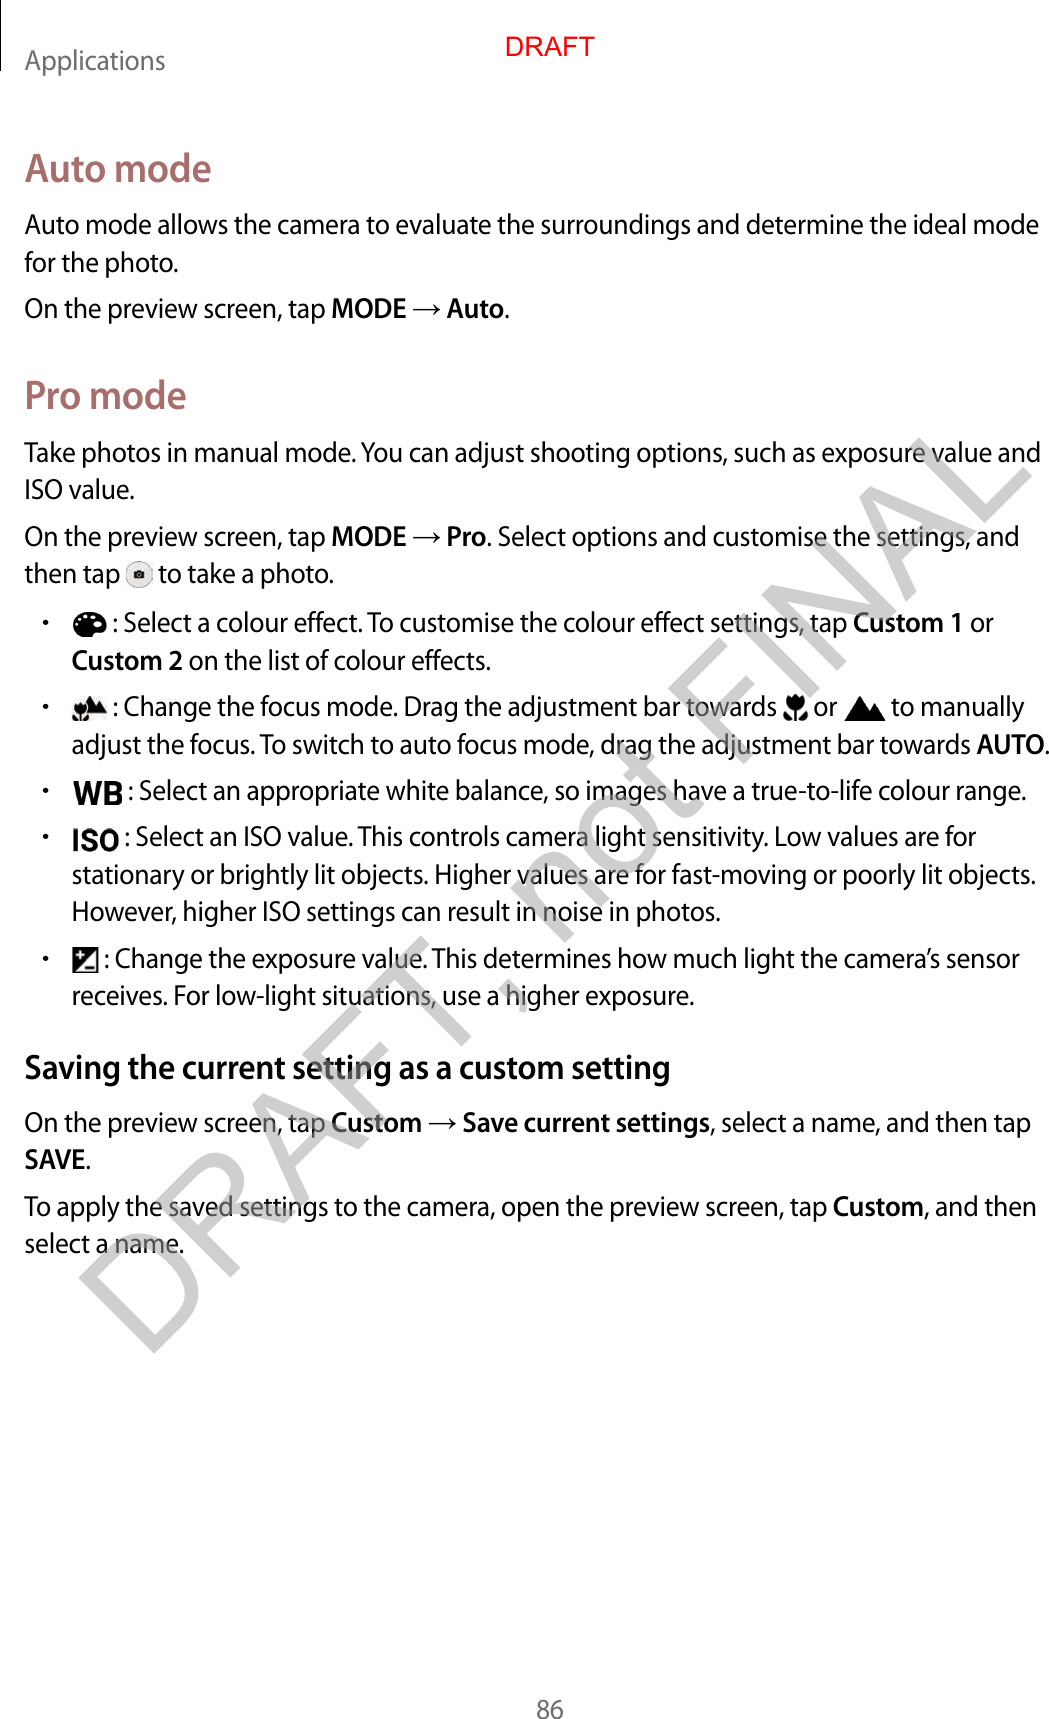 Applications86A uto modeAut o mode allow s the camera t o evalua te the surr oundings and det ermine the ideal mode for the phot o.On the preview scr een, tap MODE  Auto.Pr o modeTake photos in manual mode. You can adjust shooting options, such as exposure v alue and ISO value.On the preview scr een, tap MODE  Pro. Select options and customise the settings , and then tap   to take a photo .•: Select a colour eff ect. To customise the colour effect settings, tap Cust om 1 orCust om 2 on the list of colour eff ects.•: Change the focus mode . Dr ag the adjustment bar t ow ar ds   or  to manually adjust the focus . To switch to auto focus mode , dr ag the adjustment bar t o war ds AUTO.•: Select an appropriat e white balanc e , so images ha v e a true-to-life c olour range .•: Select an ISO value . T his con tr ols camera ligh t sensitivity. Lo w values ar e forstationary or brightly lit objects. Higher values are f or fast-mo ving or poorly lit objects. Howev er, higher ISO settings can result in noise in photos .•: Change the exposure value. This determines how much light the camera’s sensorreceives . For low -light situations, use a higher exposure.Saving the curren t setting as a custom settingOn the preview scr een, tap Custom  Save curr en t settings, select a name, and then tap SAVE.To apply the sav ed settings to the camer a, open the pr eview scr een, tap Custom, and then select a name.DRAFT, not FINALDRAFT